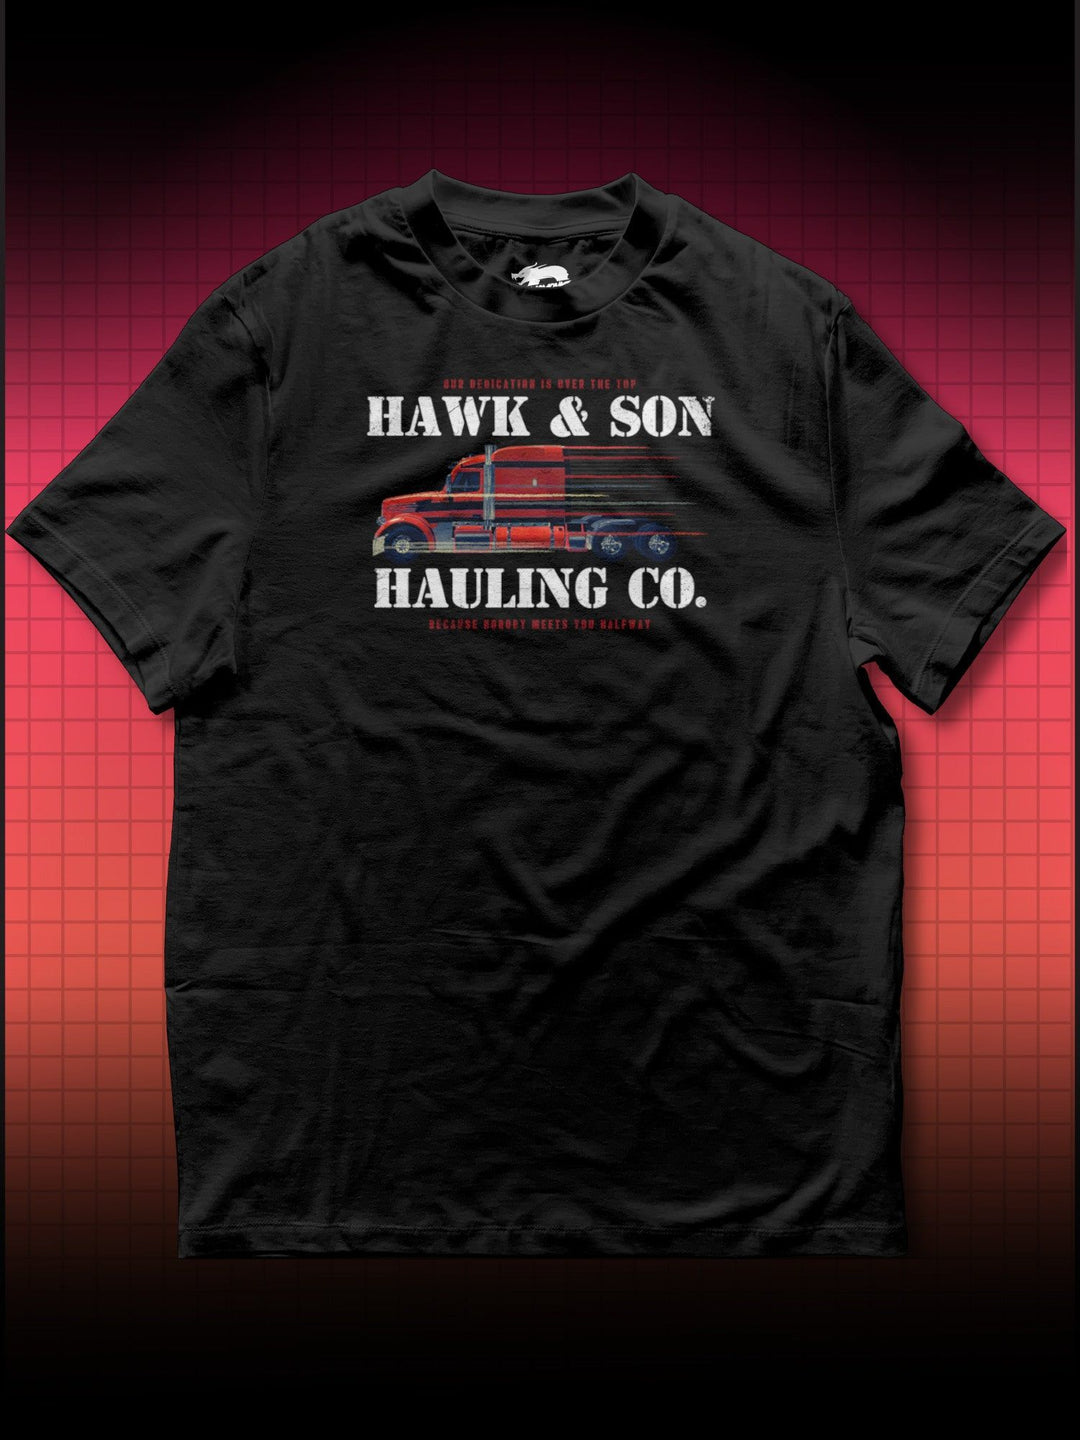 OVER THE TOP - LINCOLN HAWK AND SON - LOGO PRINT - HAWK HAULING | SYLVESTER STALLONE 80S RETRO | T-SHIRT - DRAMAMONKS